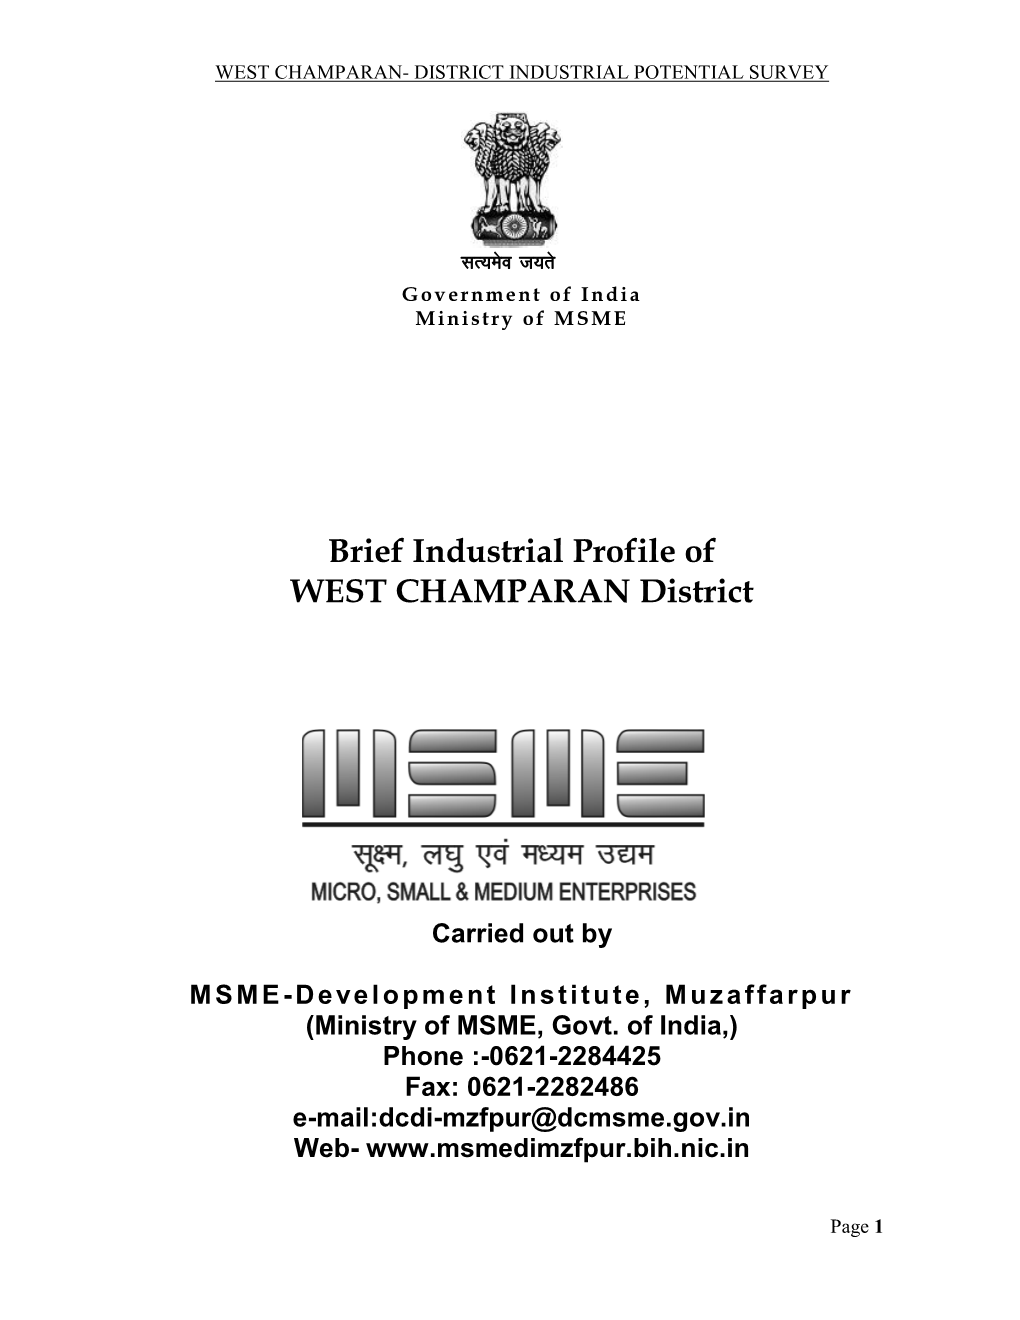 Brief Industrial Profile of WEST CHAMPARAN District